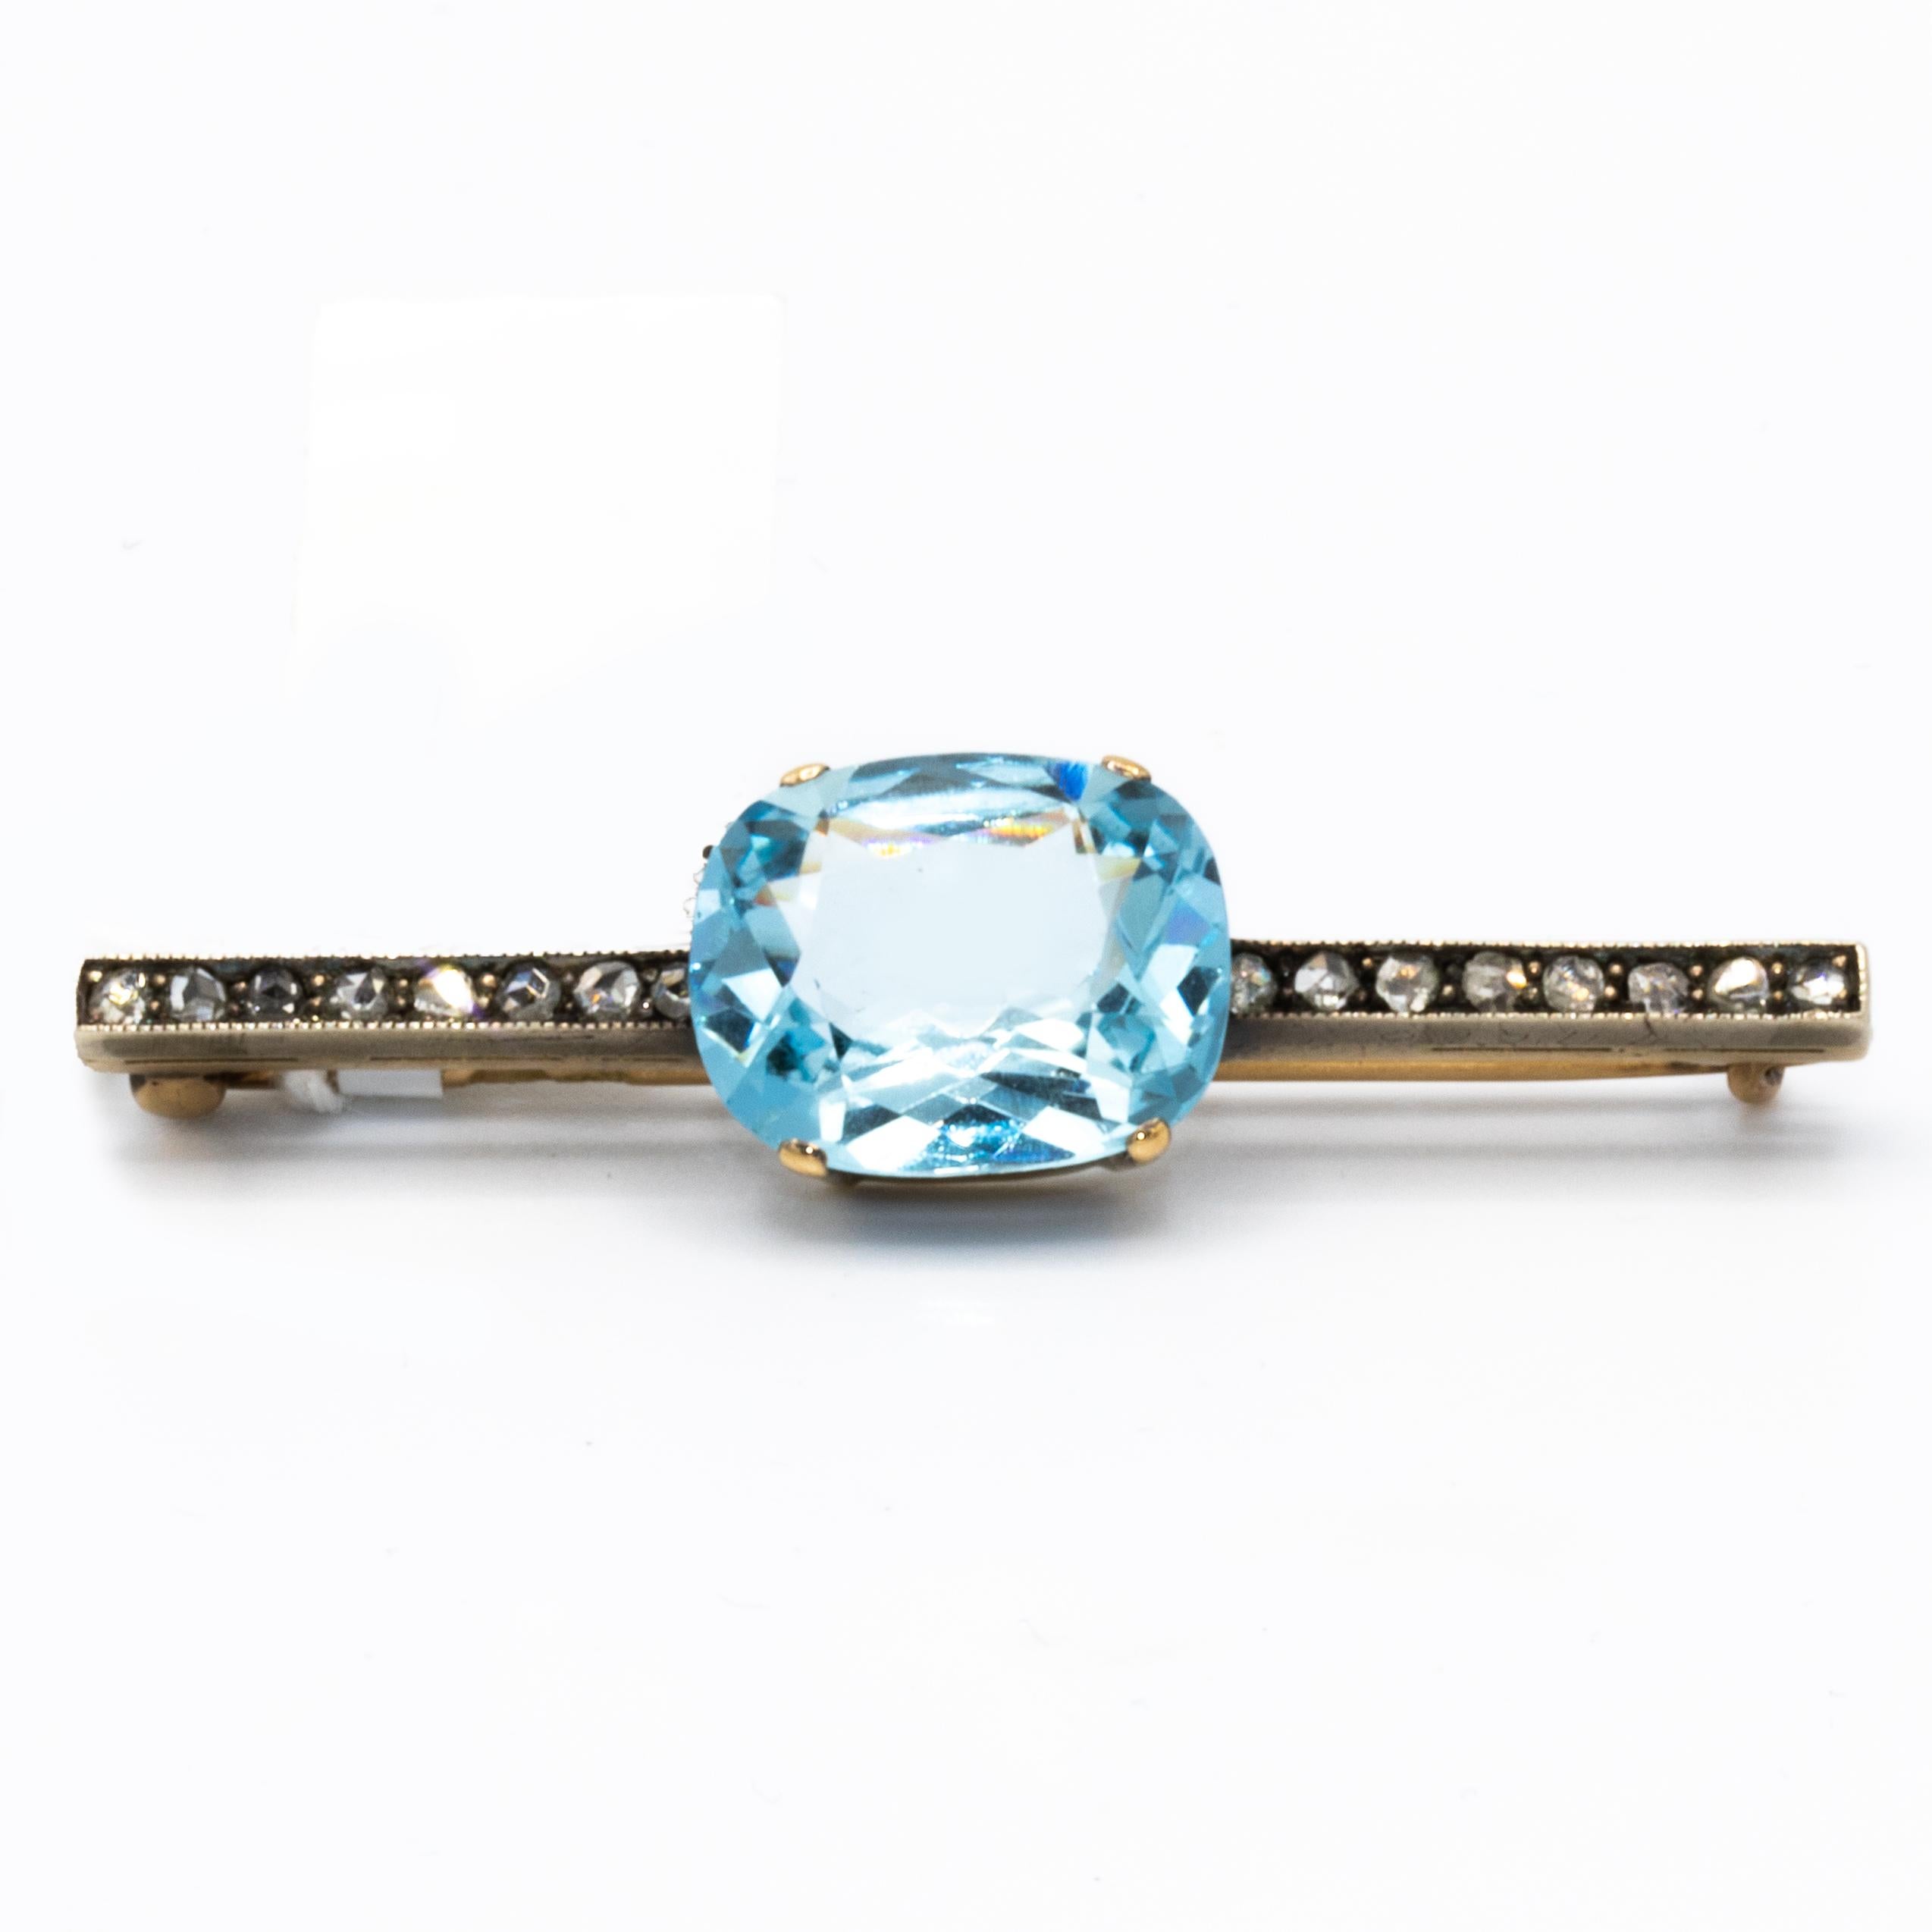 This Beautiful Antique Signed Faberge Pin in the pinnacle of Elegance and Authority. Made between the years of 1856 and 1917, this pin has been through a lot, while remaining in its original box. 
Aquamarine = 5 carats
Diamonds = 0.2 carats
Made